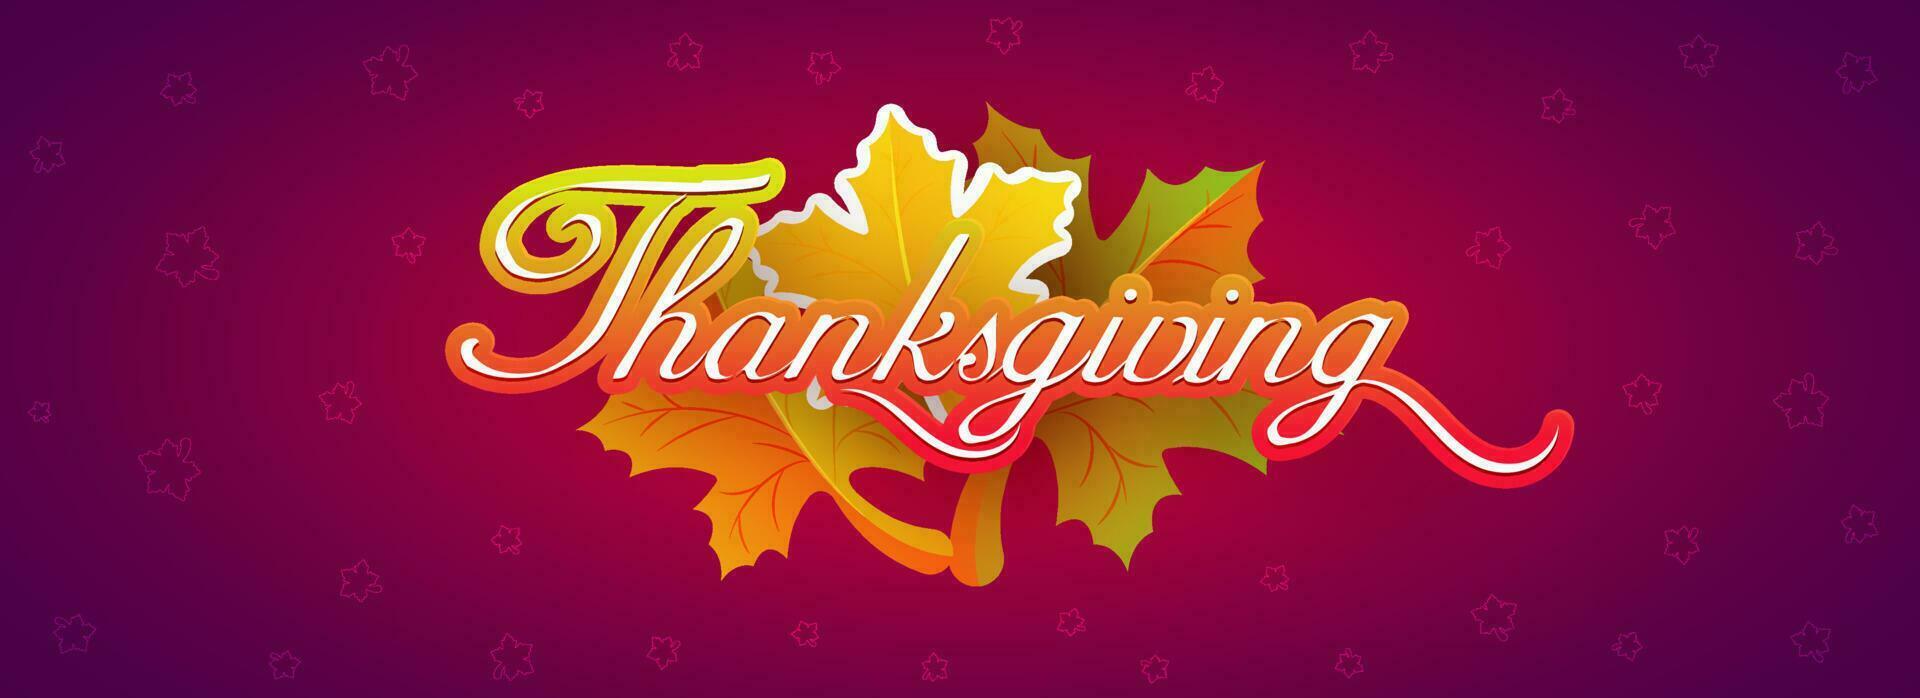 Calligraphy of Thanksgiving on purple maple leaves pattern background. Header or banner design. vector